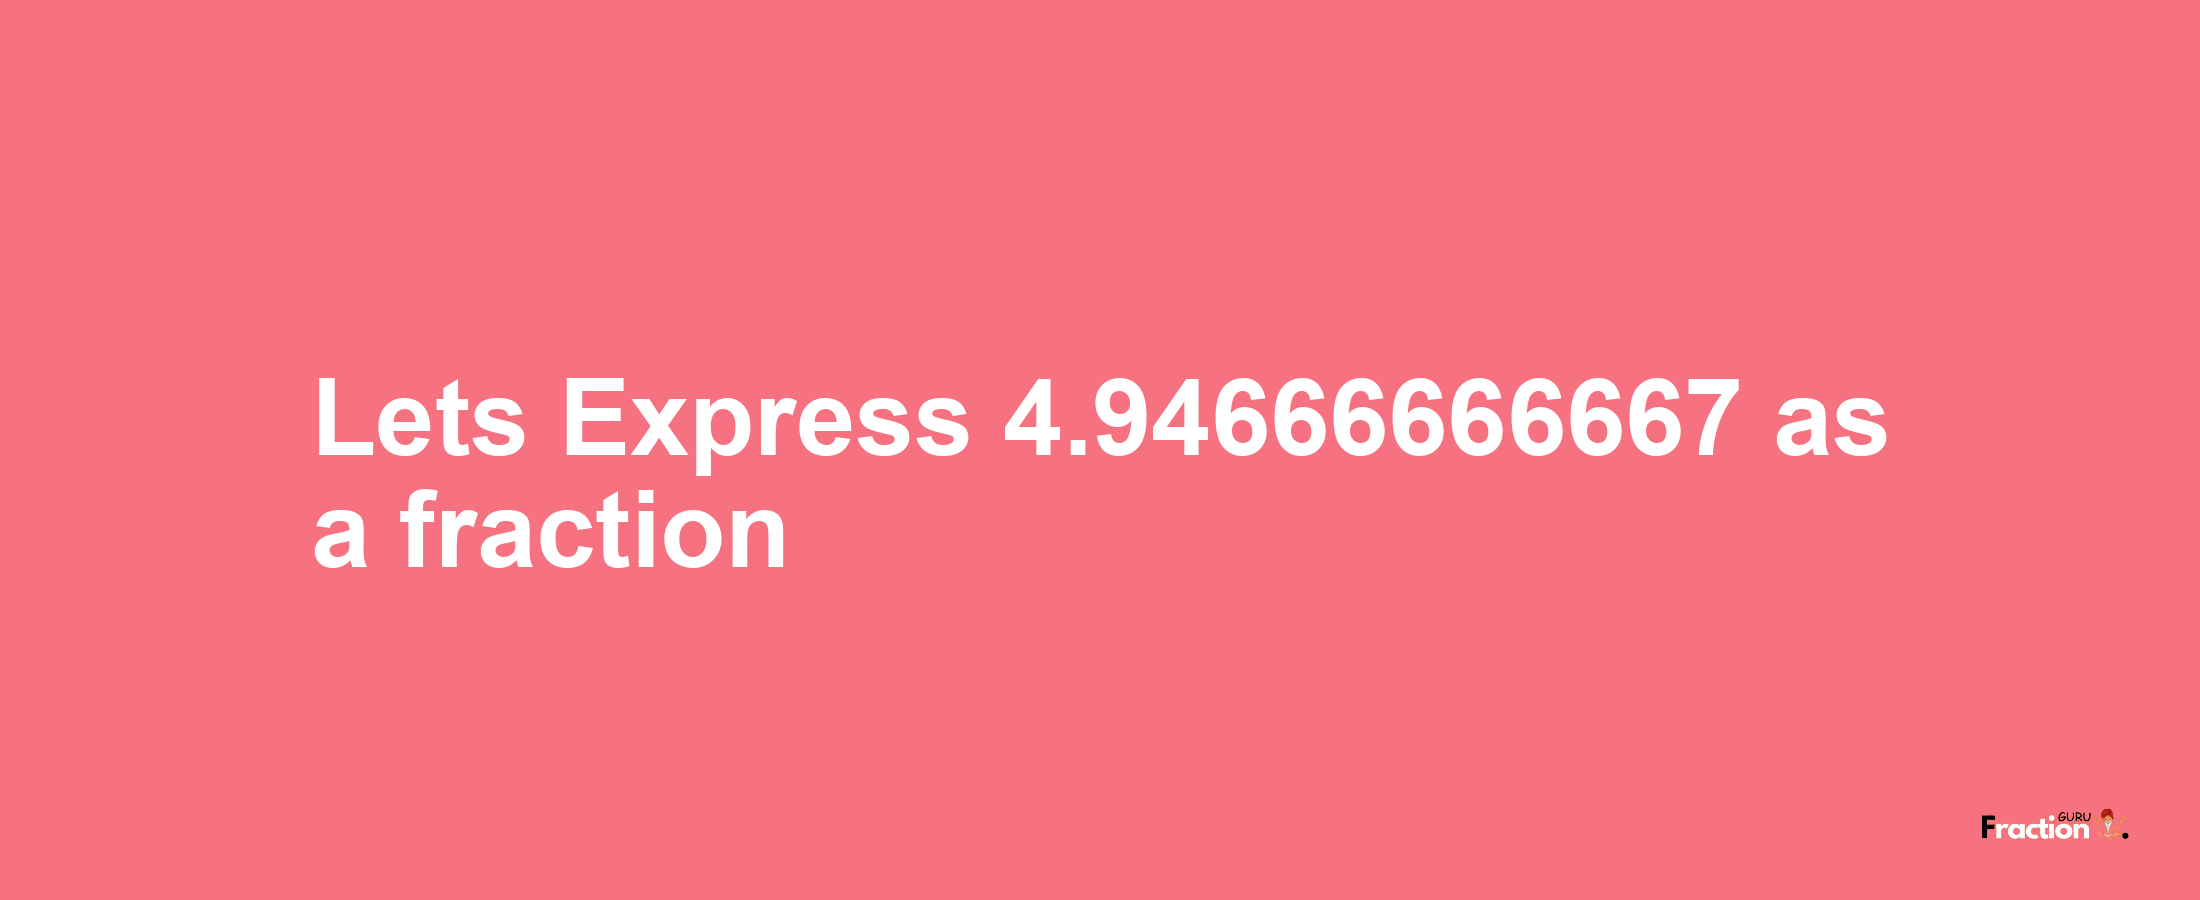 Lets Express 4.94666666667 as afraction